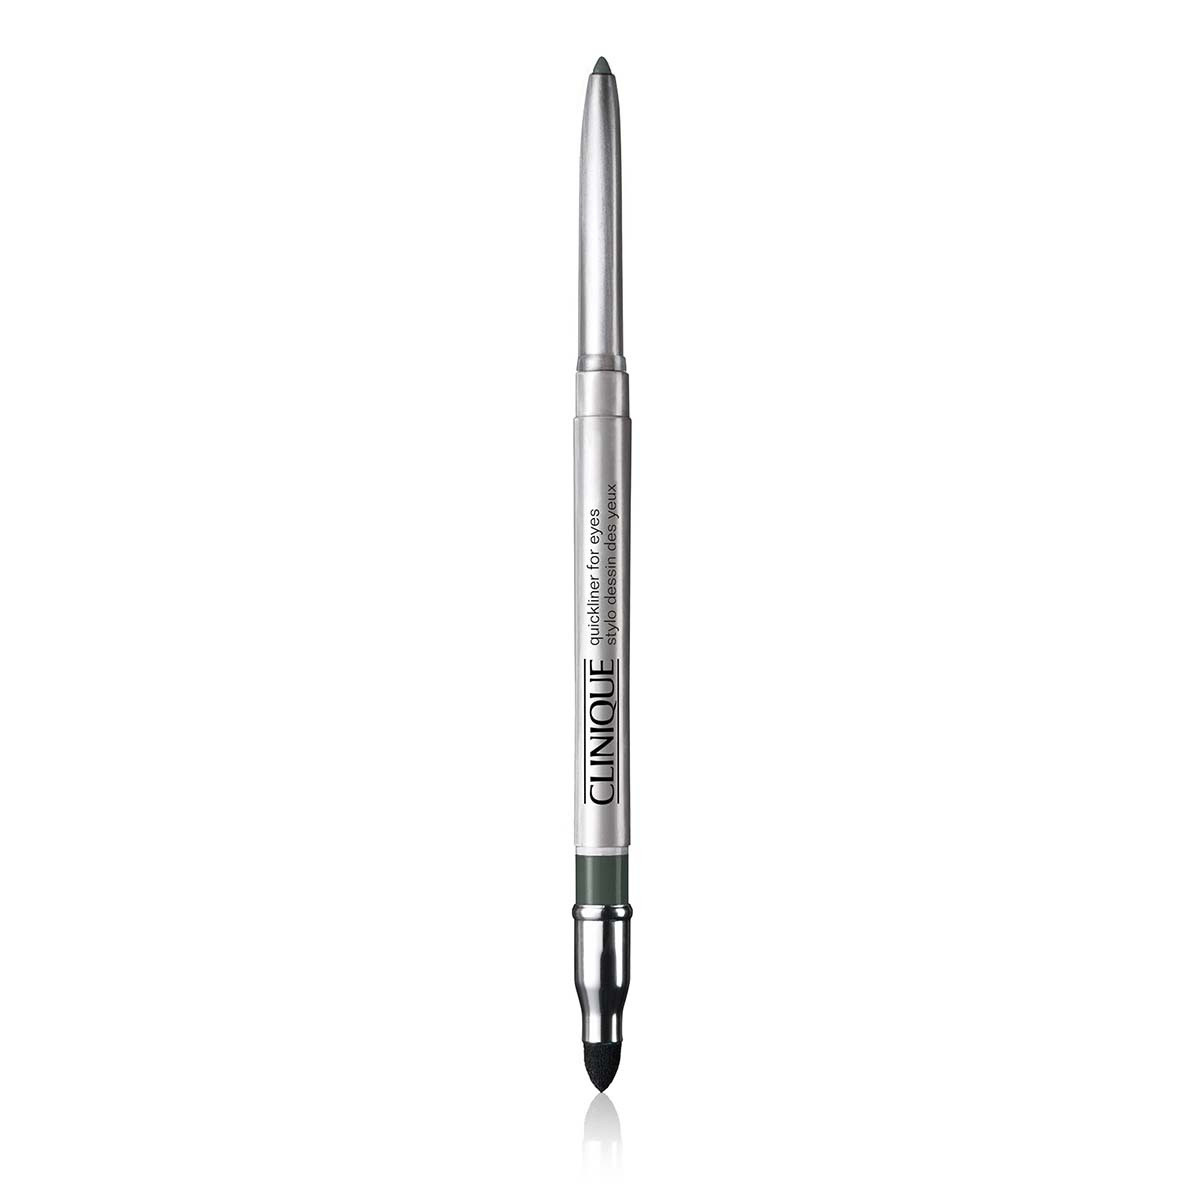 Clinique quickliner for eyes - 12 moss, 12 MOSS, large image number 0